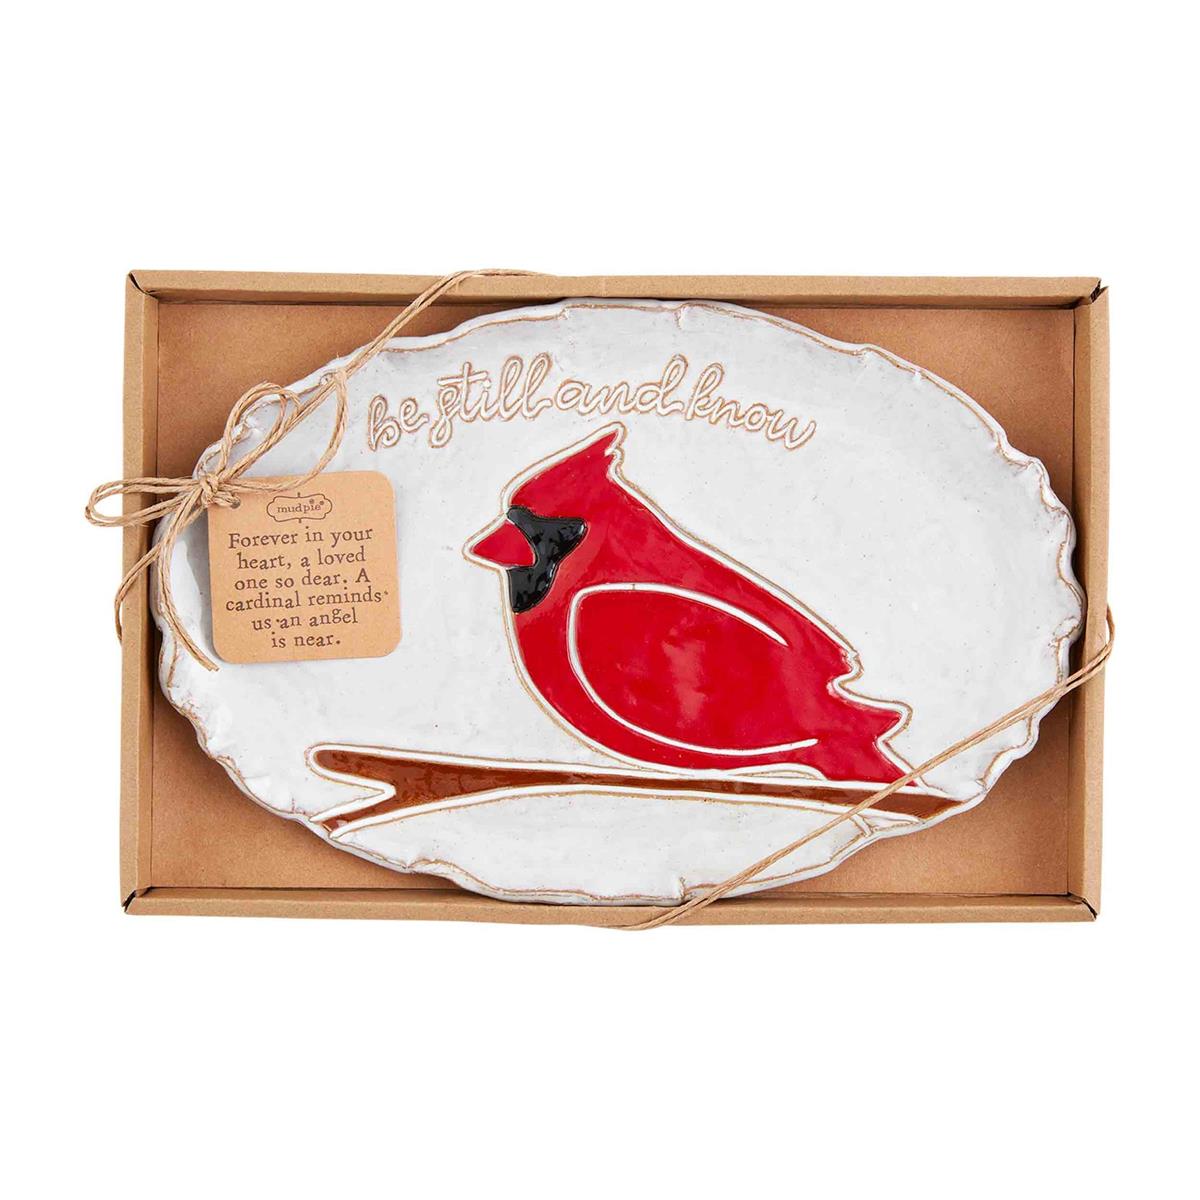 Bogg Bag Heart Collection Inserts / Love Birds